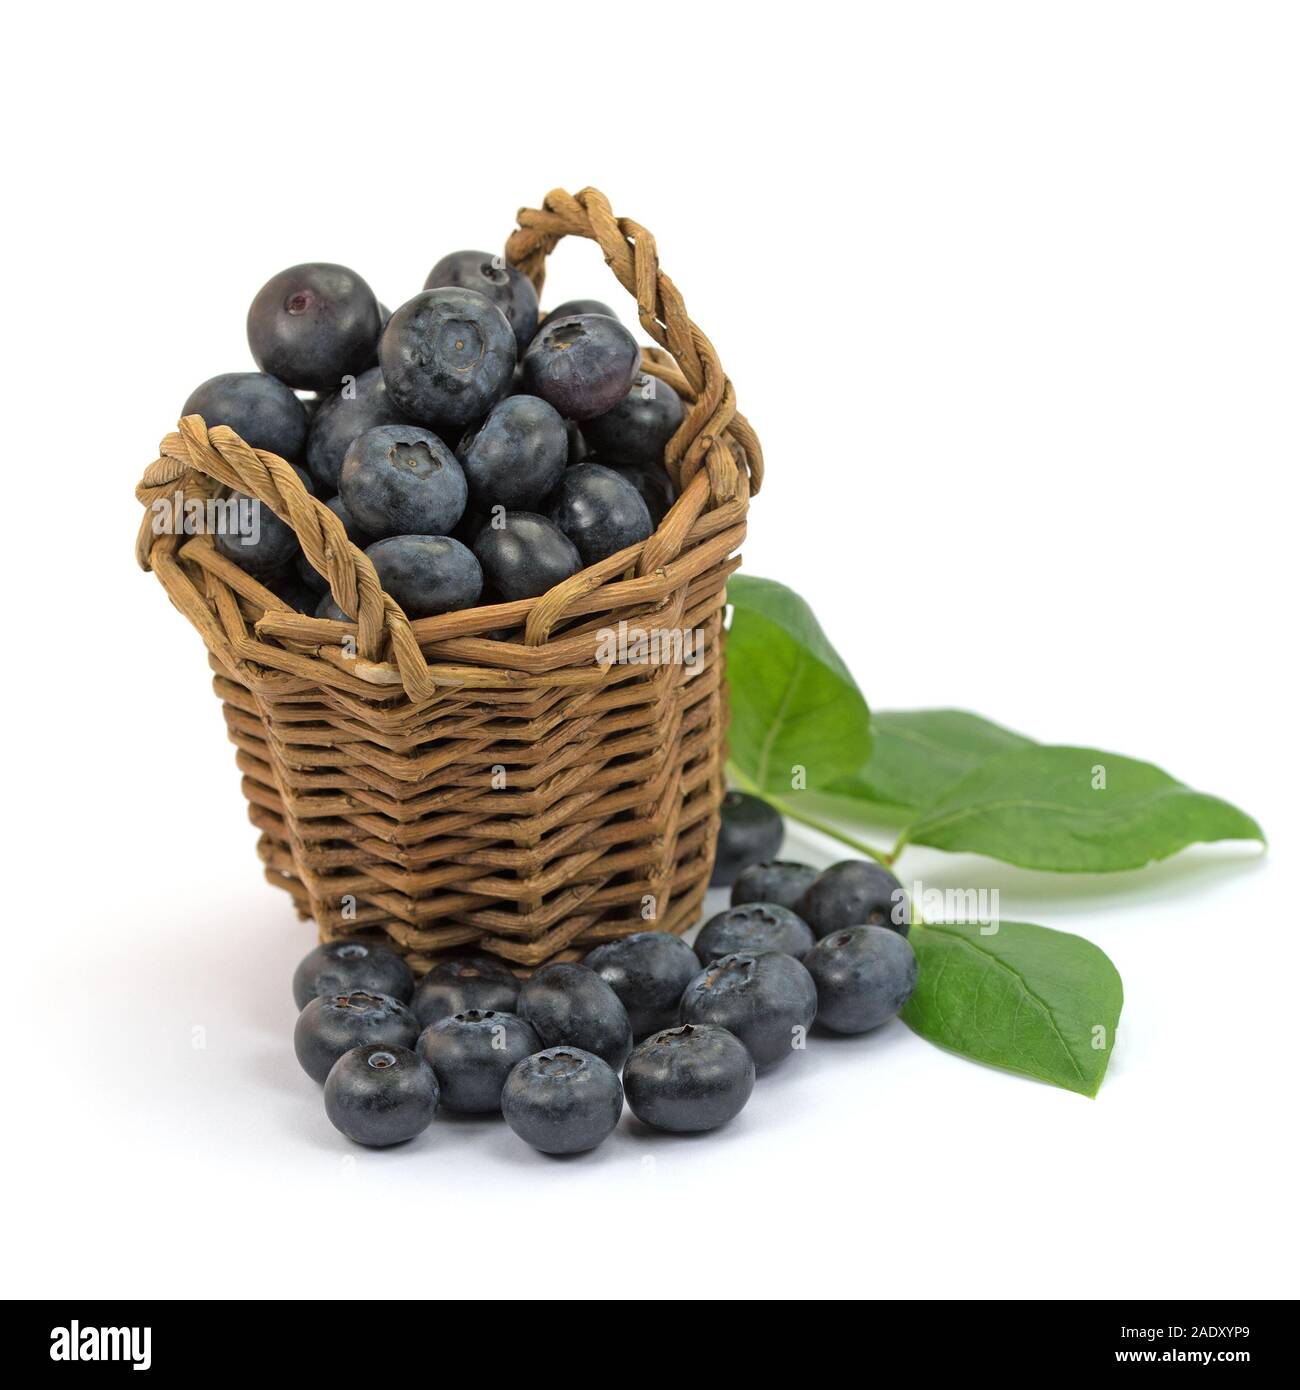 Blueberries in the basket against white background Stock Photo